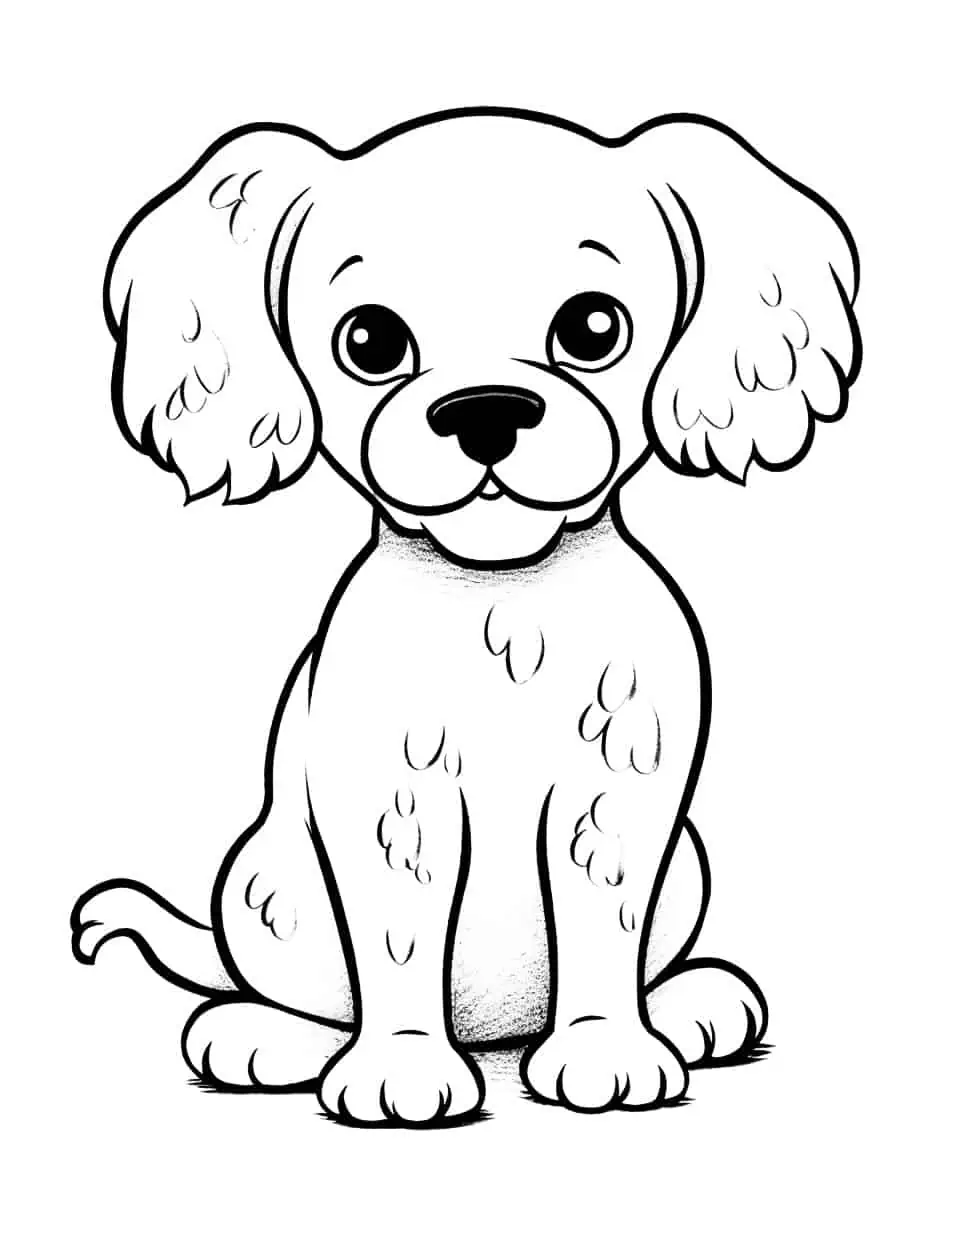 Easy Poodle Drawing Dog Coloring Page - A simple drawing of a Poodle that’s easy for kids to color.